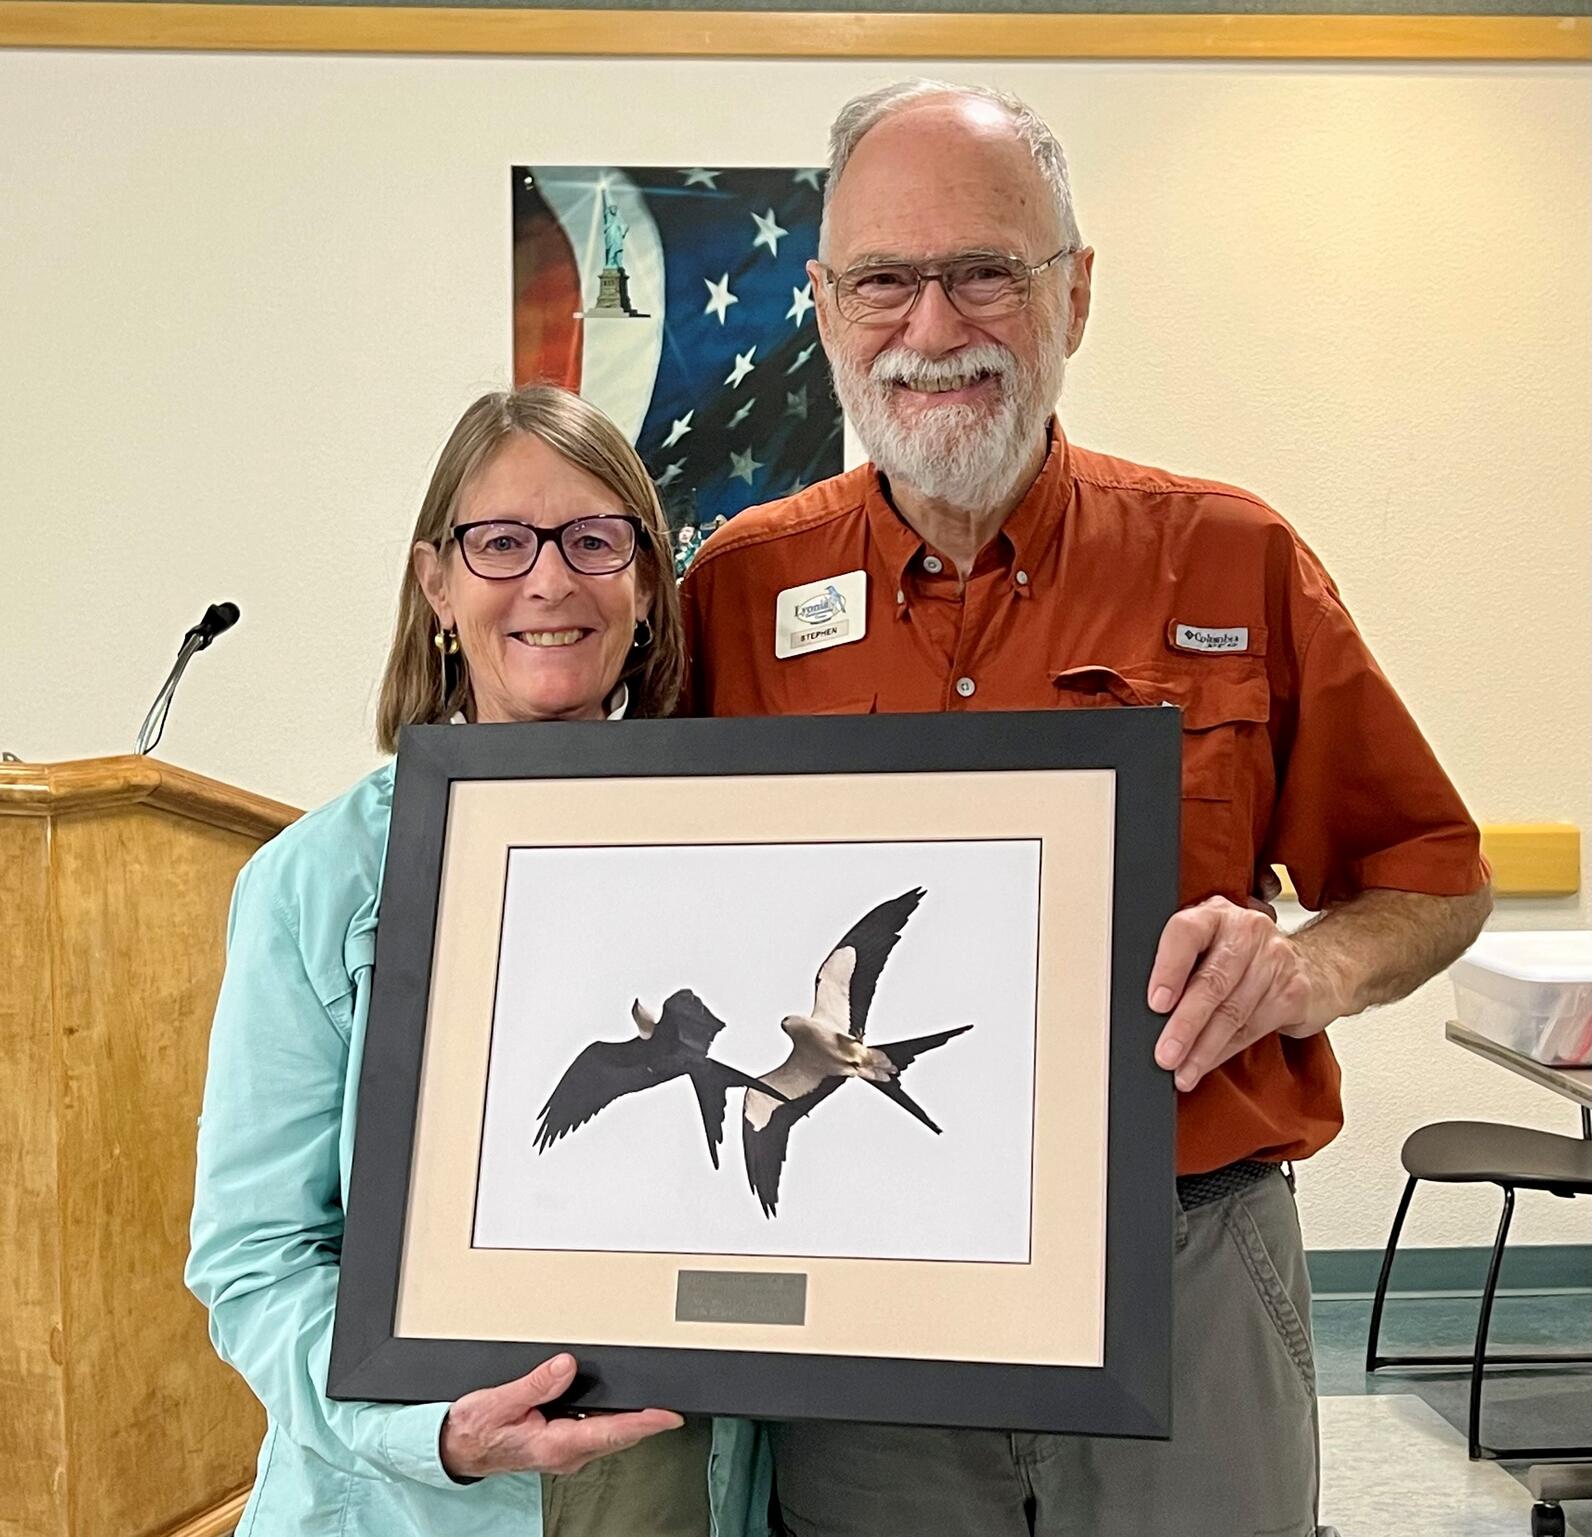 Jacqui Sulek and Stephen Kintner stand together, holding Stephen's award: a framed photo of two Swallow-tailed Kites in flight, with a plaque at the bottom.